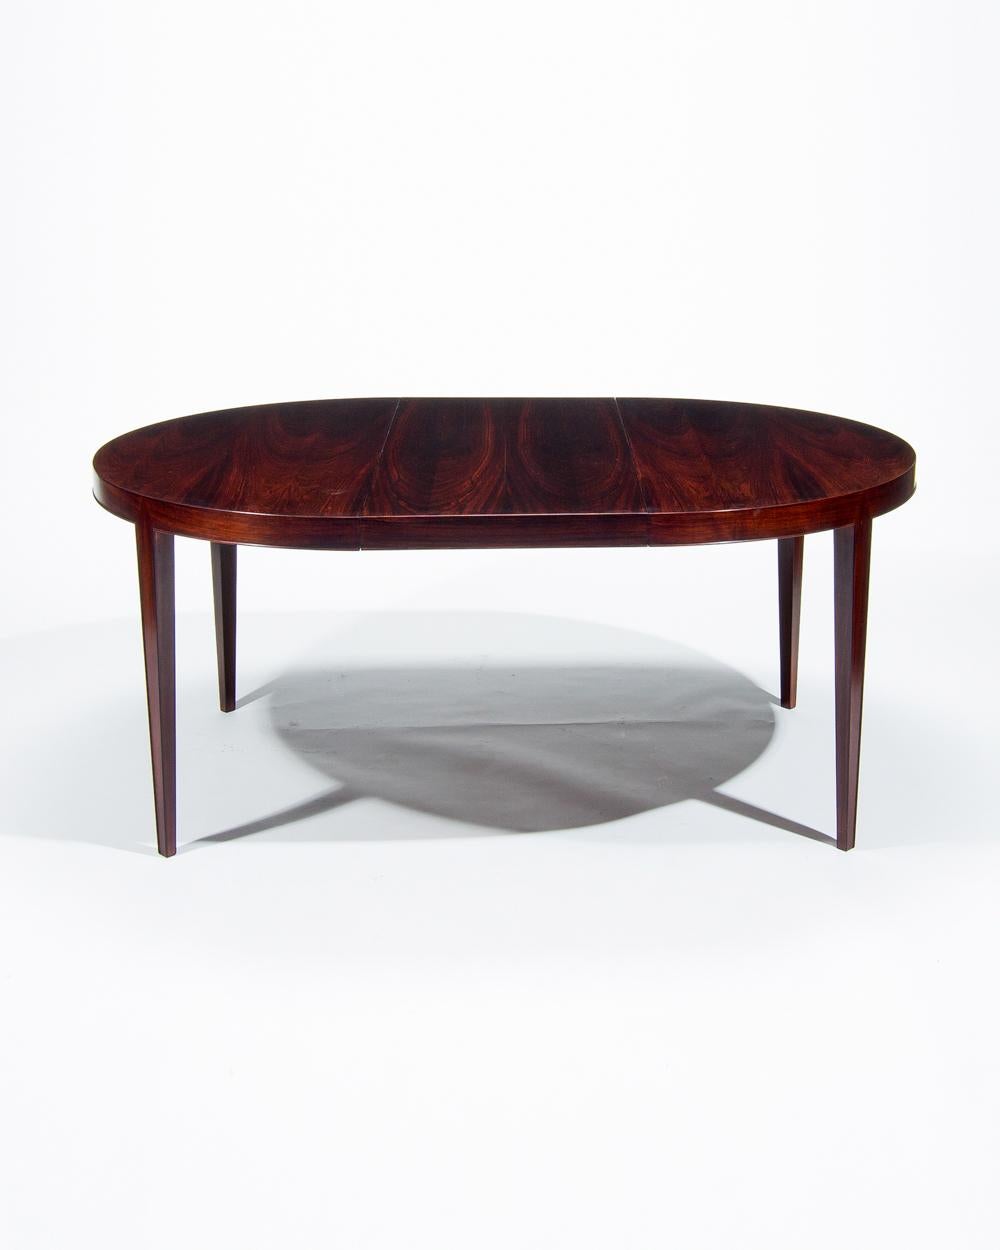 Danish Rosewood Dining Table by Severin Hansen, Midcentury Design, 1960s In Good Condition For Sale In London, GB